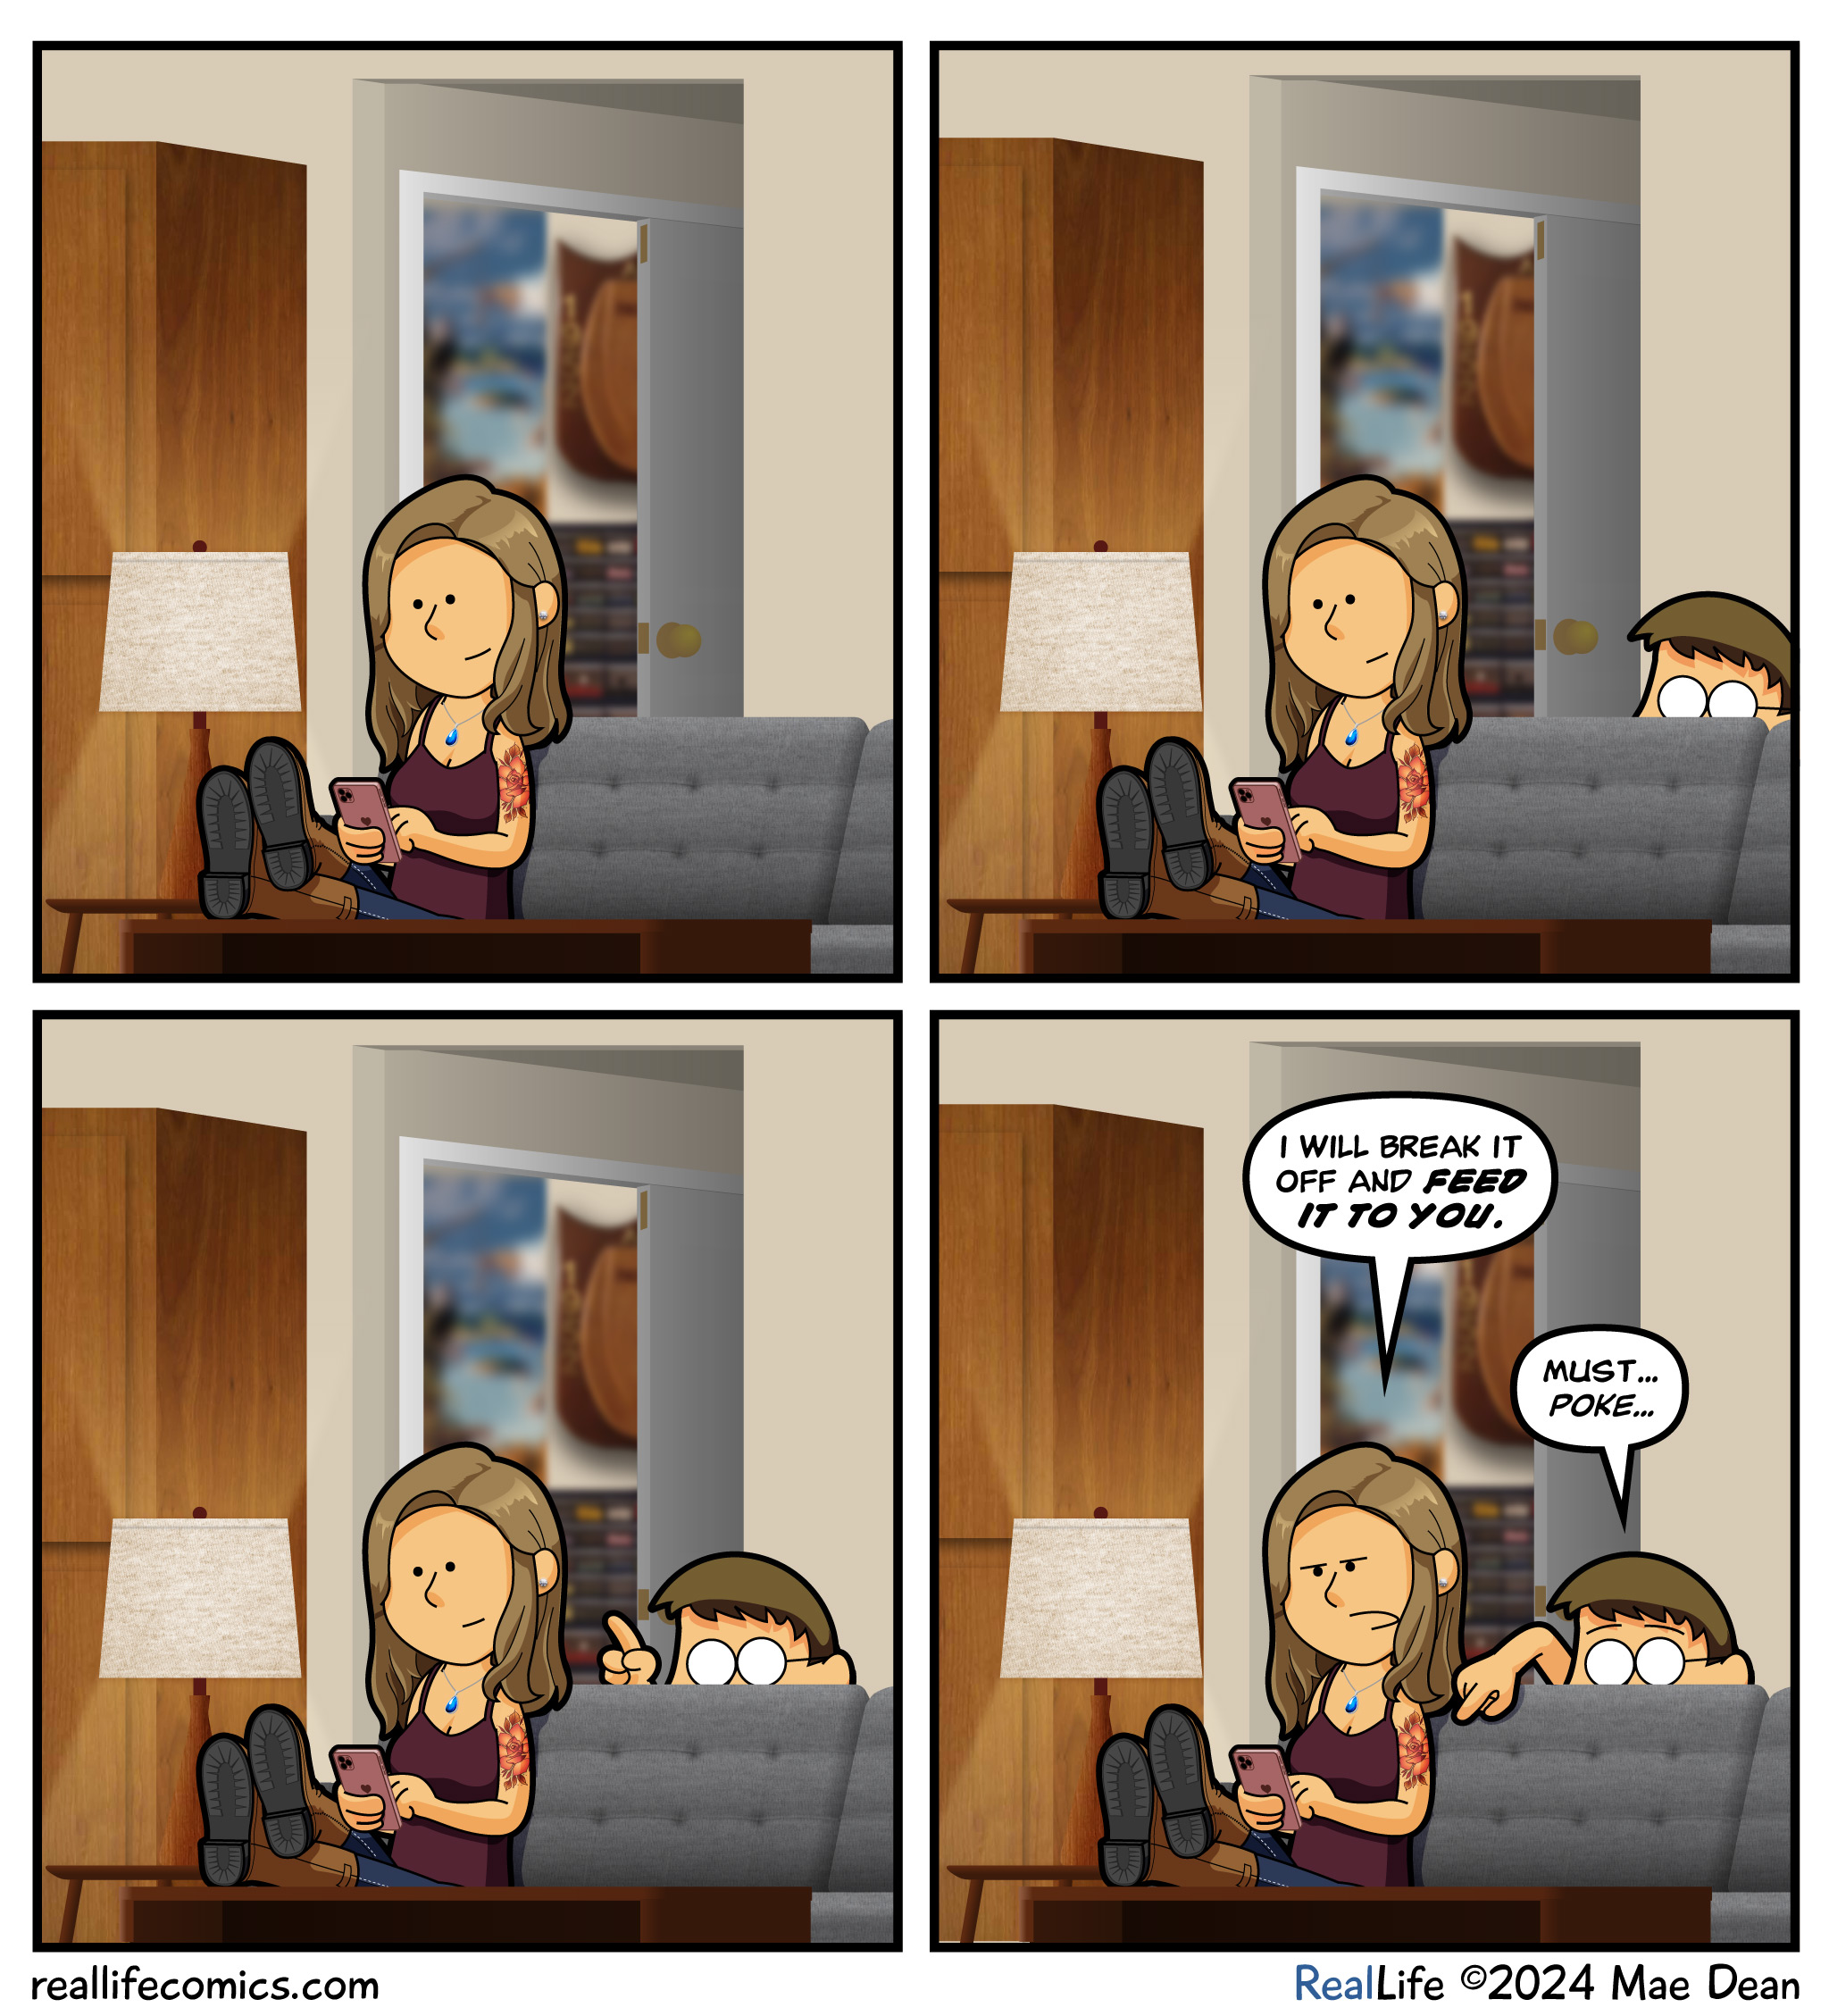 Panel 1
Mae Sits on couch

Panel 2
Dave pokes his head above the back of the couch

Panel 3
Dave reaches a single finger to poke the tattoo

Panel 4
Mae: I will break it off and FEED IT TO YOU.
Dave: must… poke…